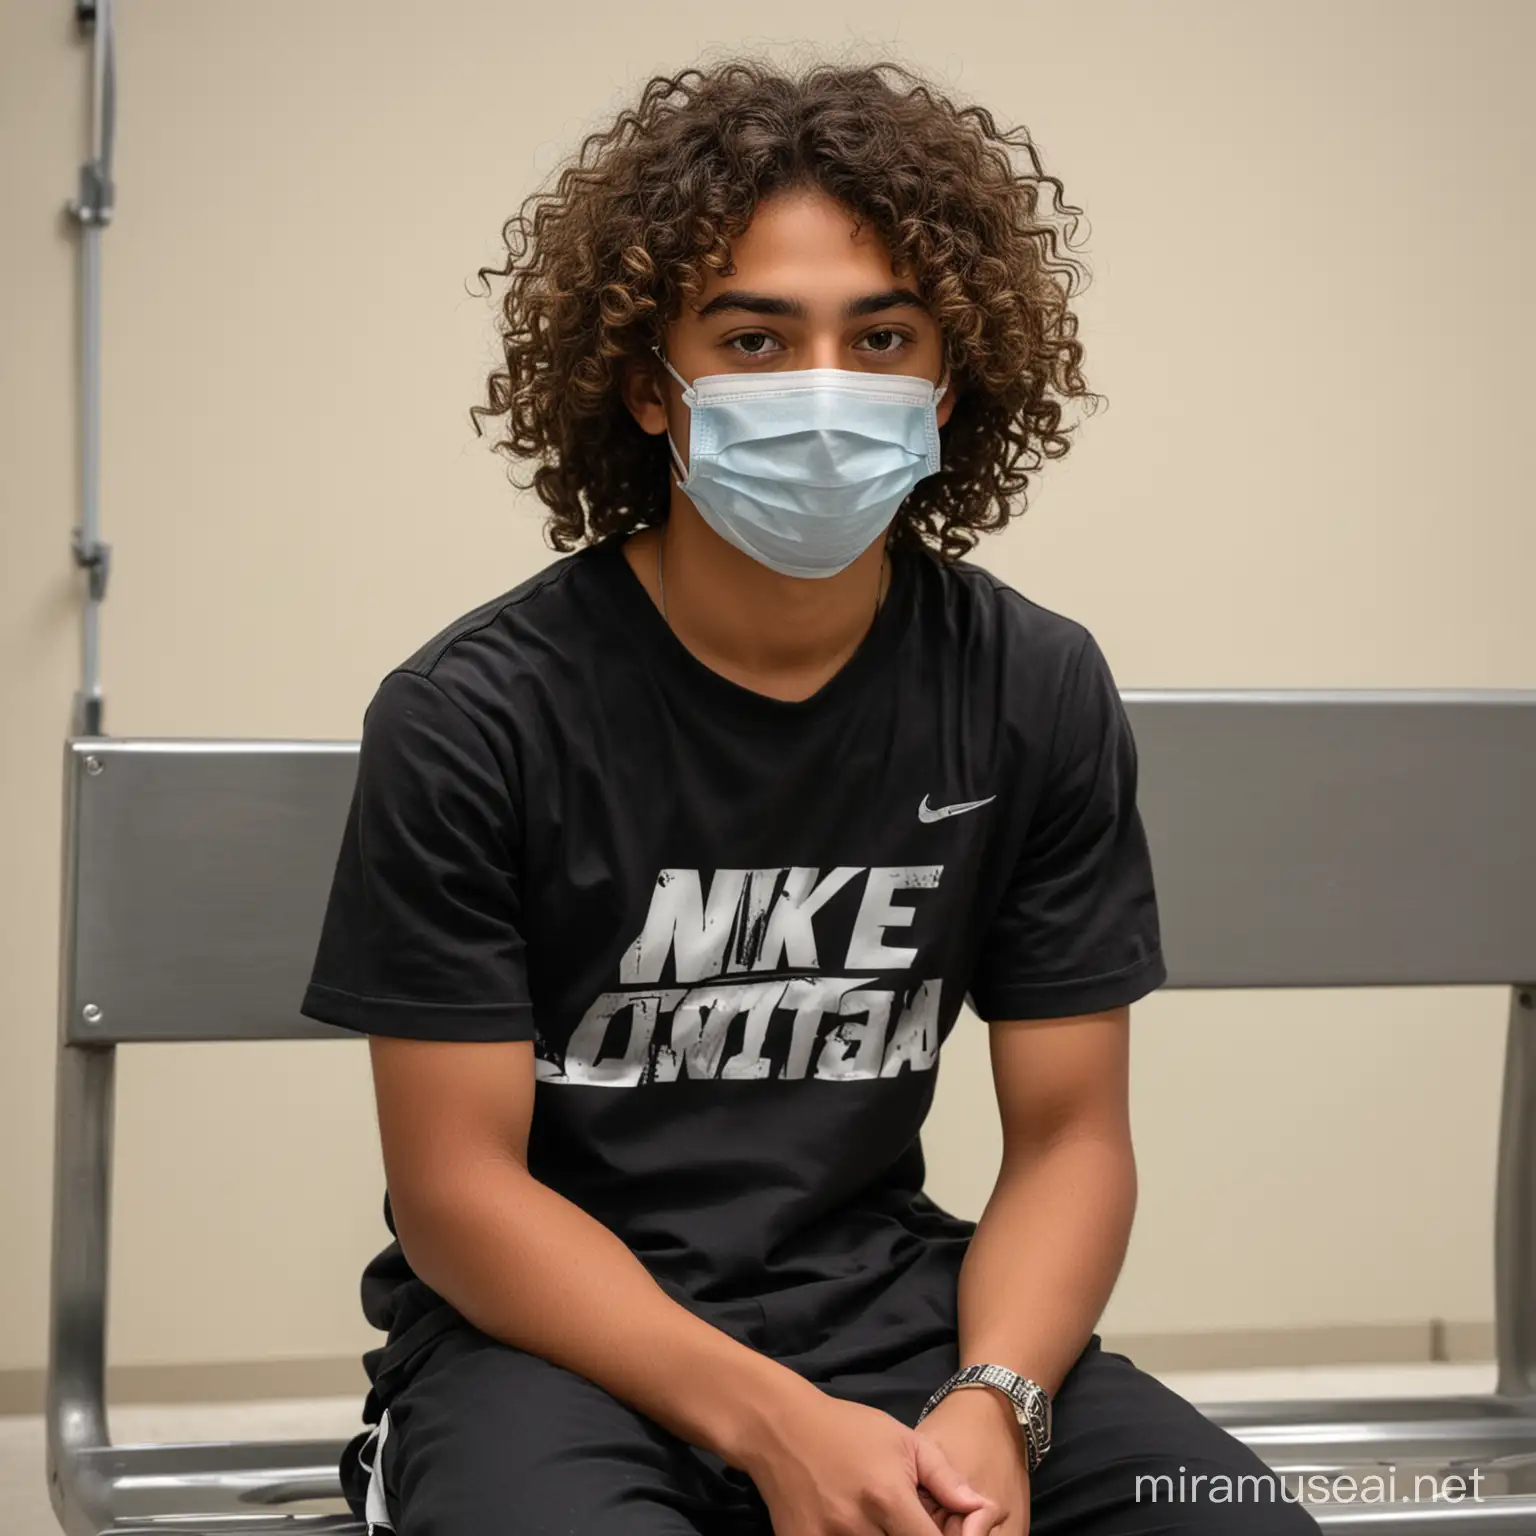 brown boy with long curly hair sit on a metal bench wearing a mask and a nike black shirt while waits in room full of people in a hospital
